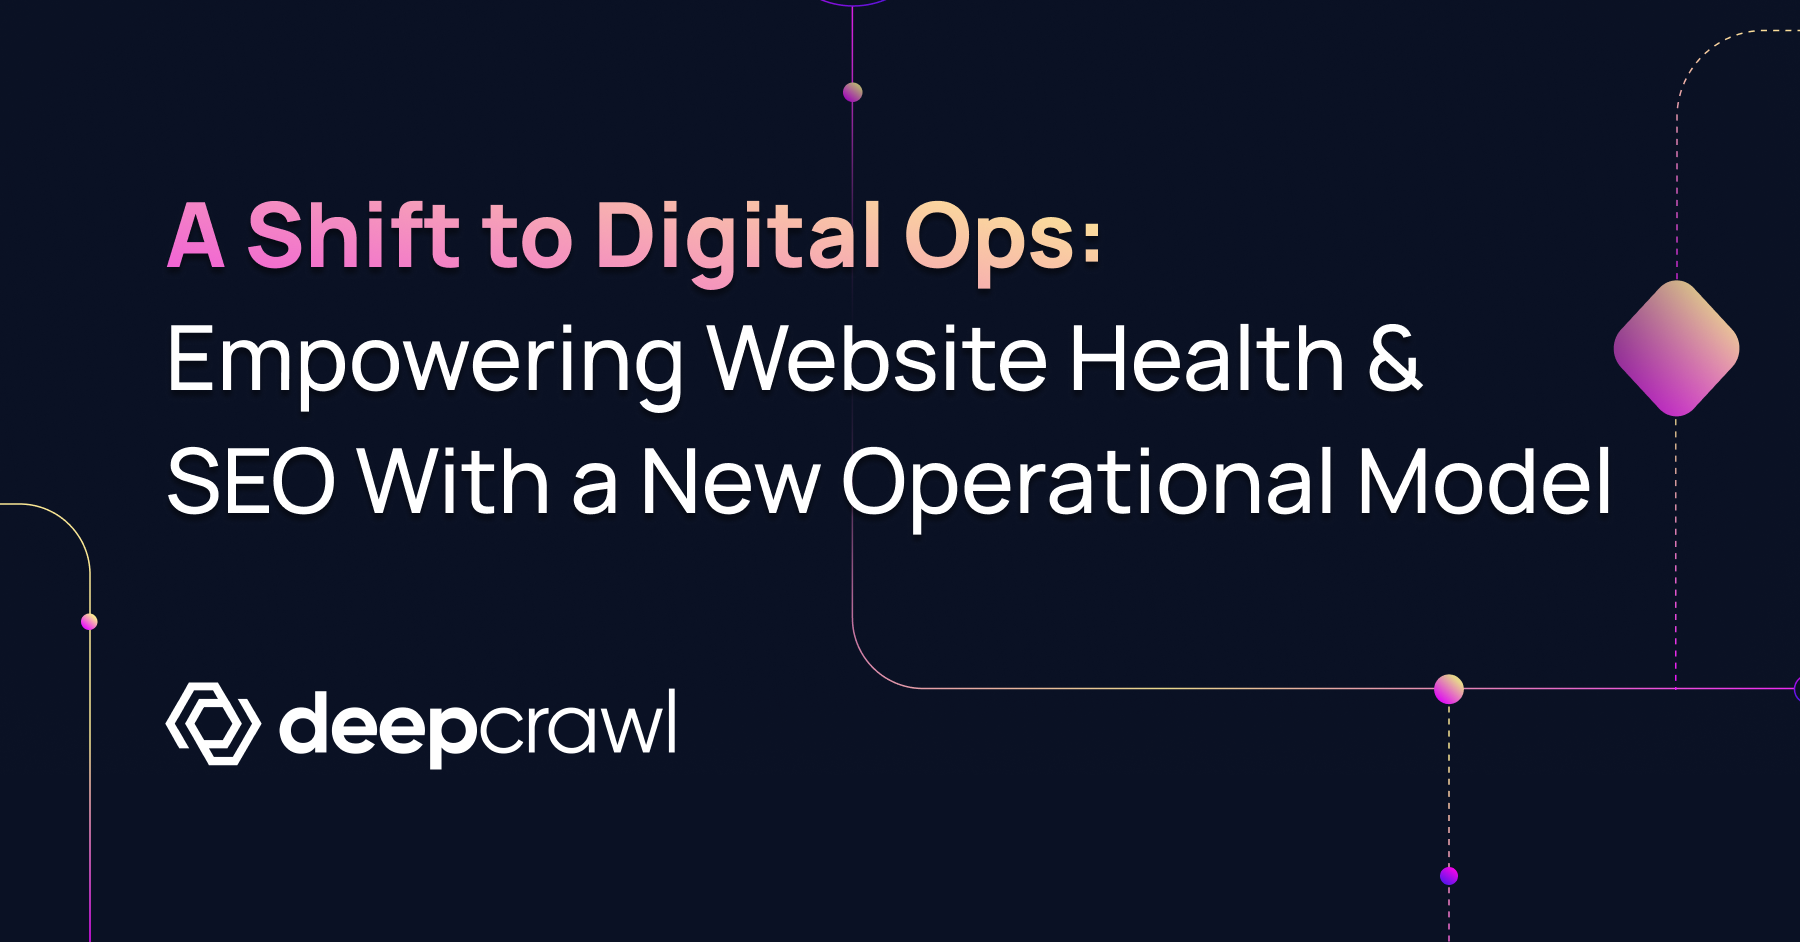 Digital Ops - Empowering Website Health and SEO with a New Operational Model